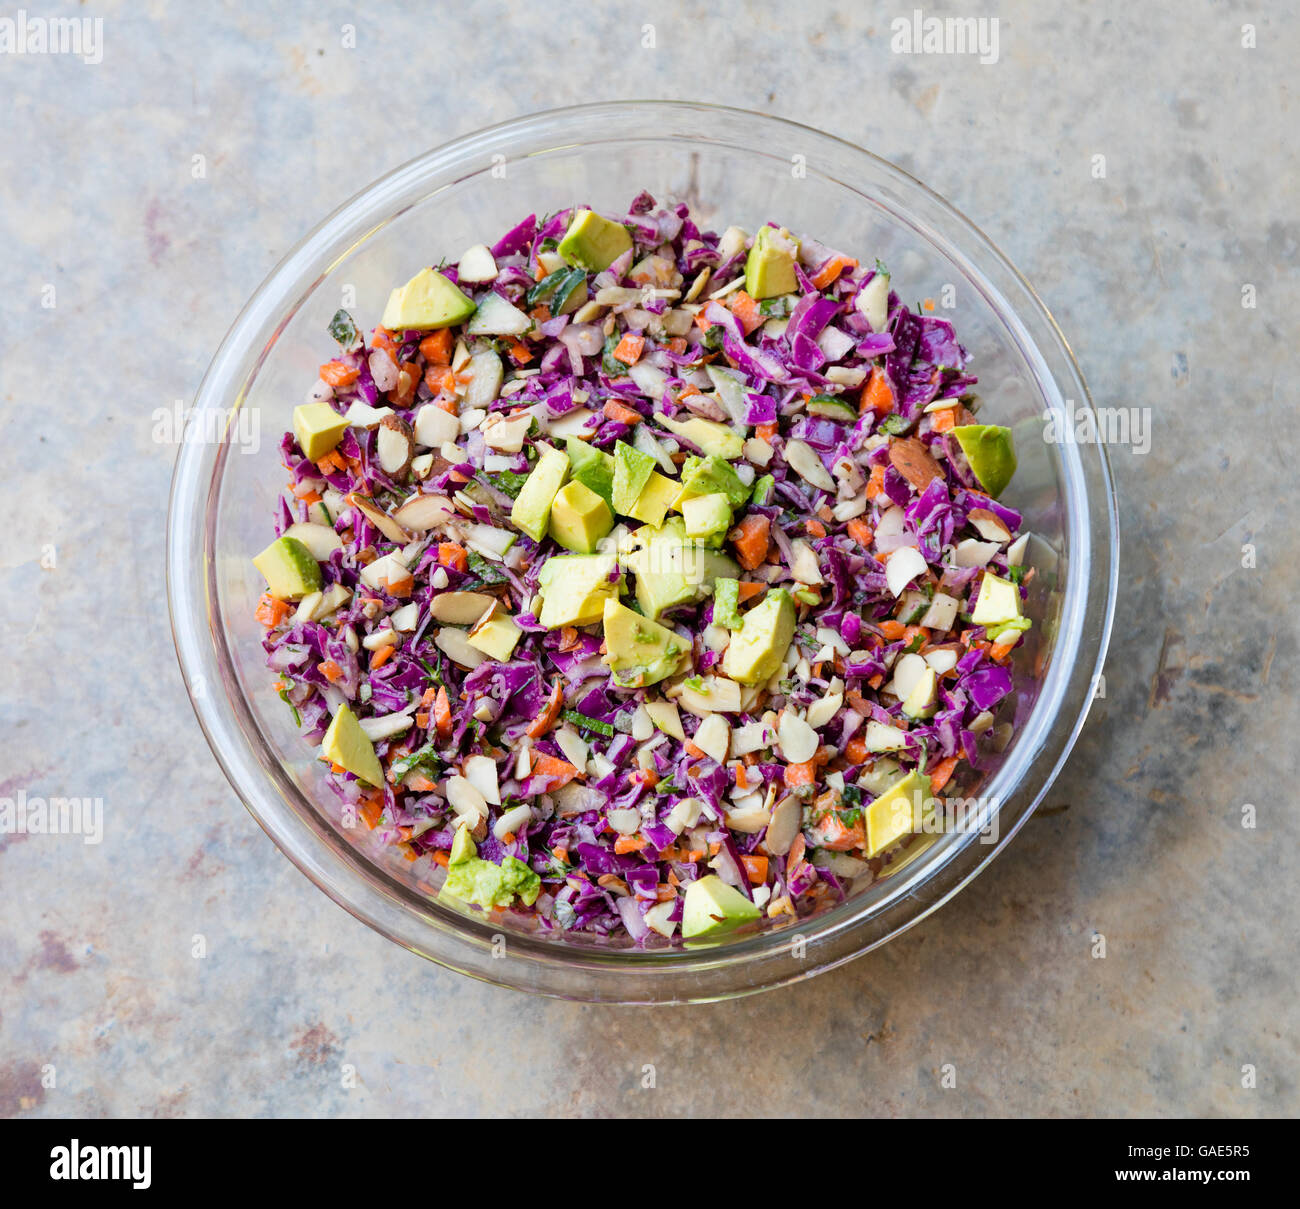 Top view of rainbow slaw with Avocado in a bowl Stock Photo